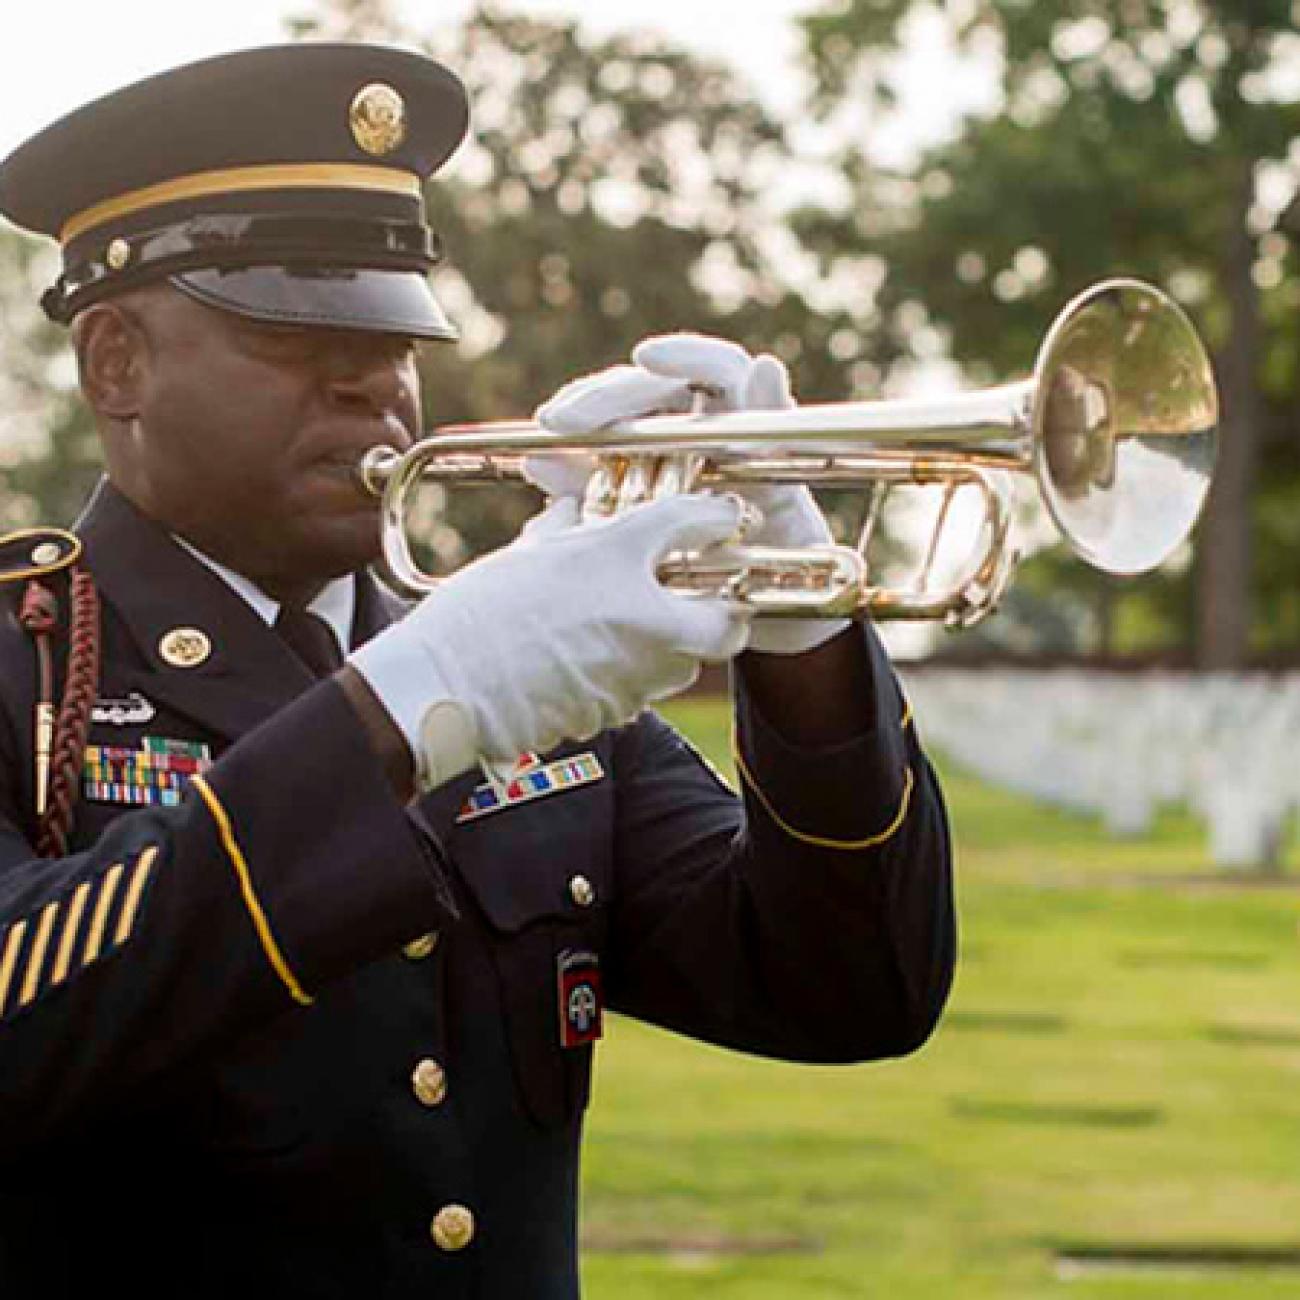 A man in a military uniform plays a trumpet in a graveyard.